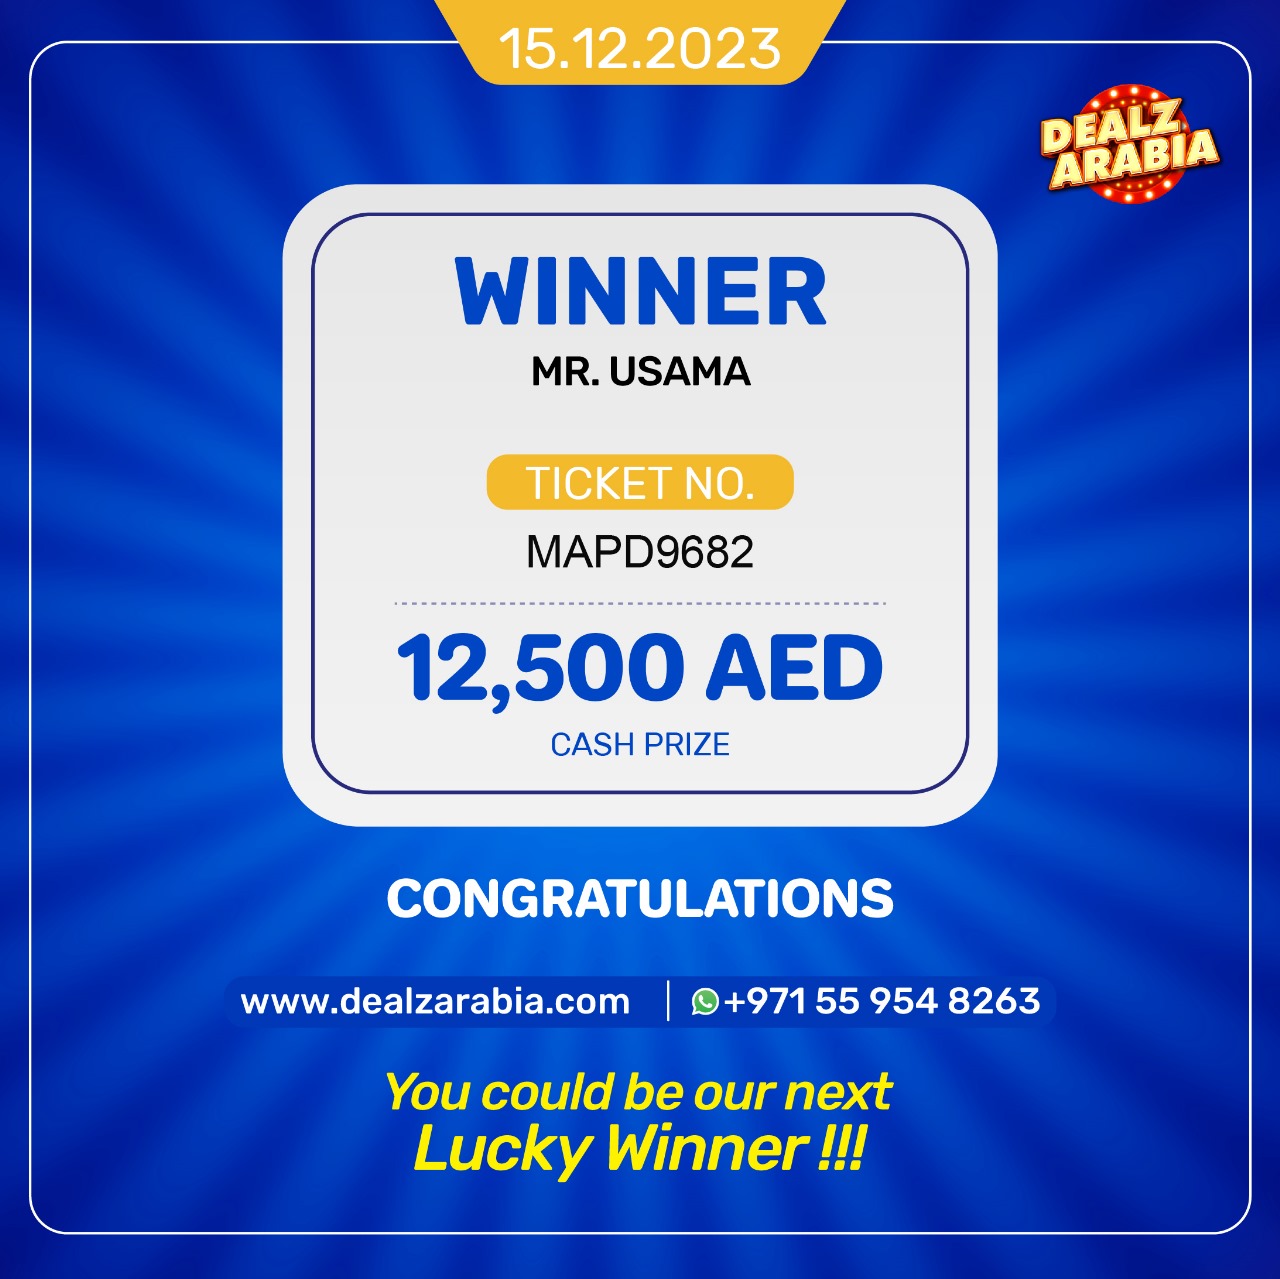 TODAY'S LIVE DRAW, CASH PRIZE OF 12,500 AED